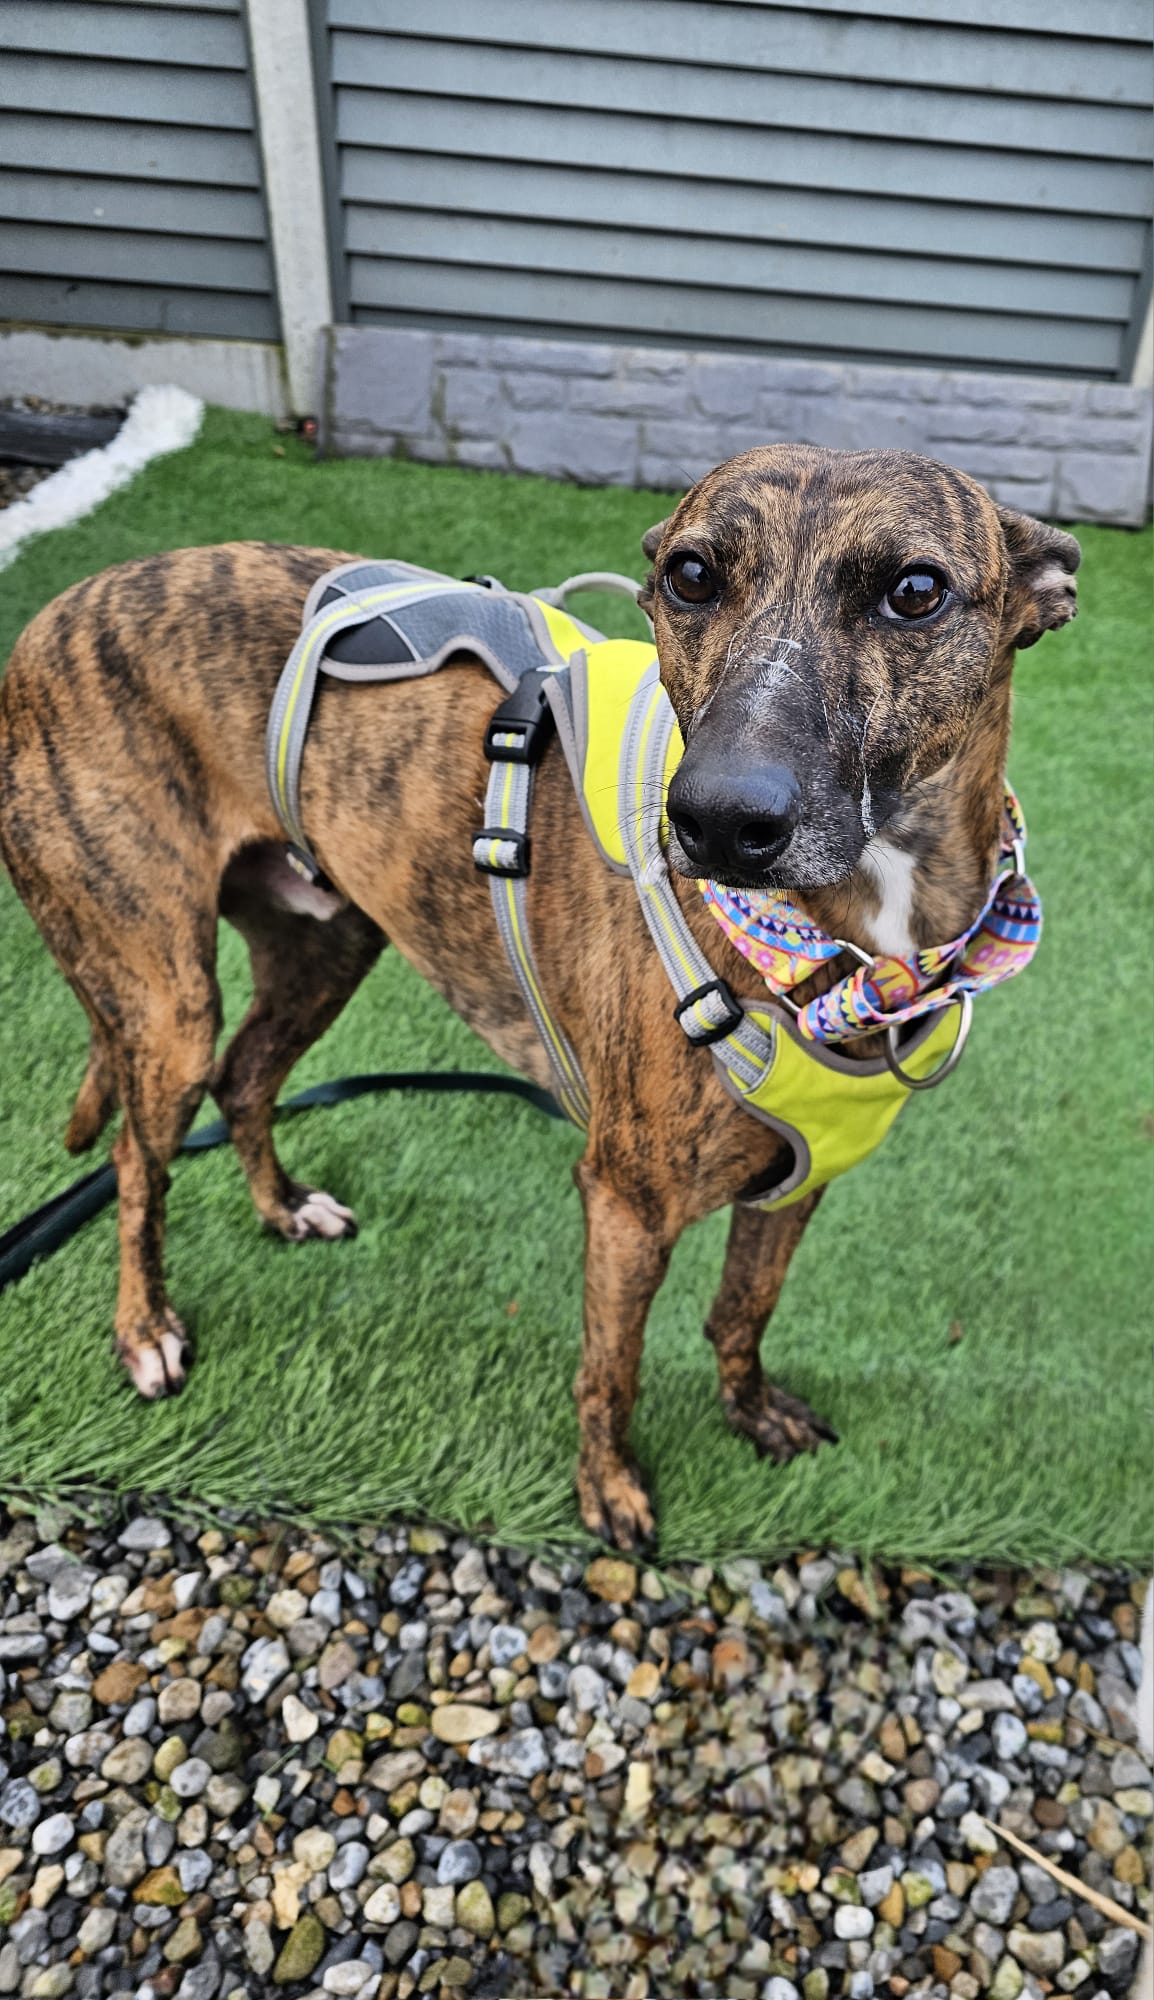 Three-year-old whippet Izzy is up for adoption at the Haven Rescue Centre